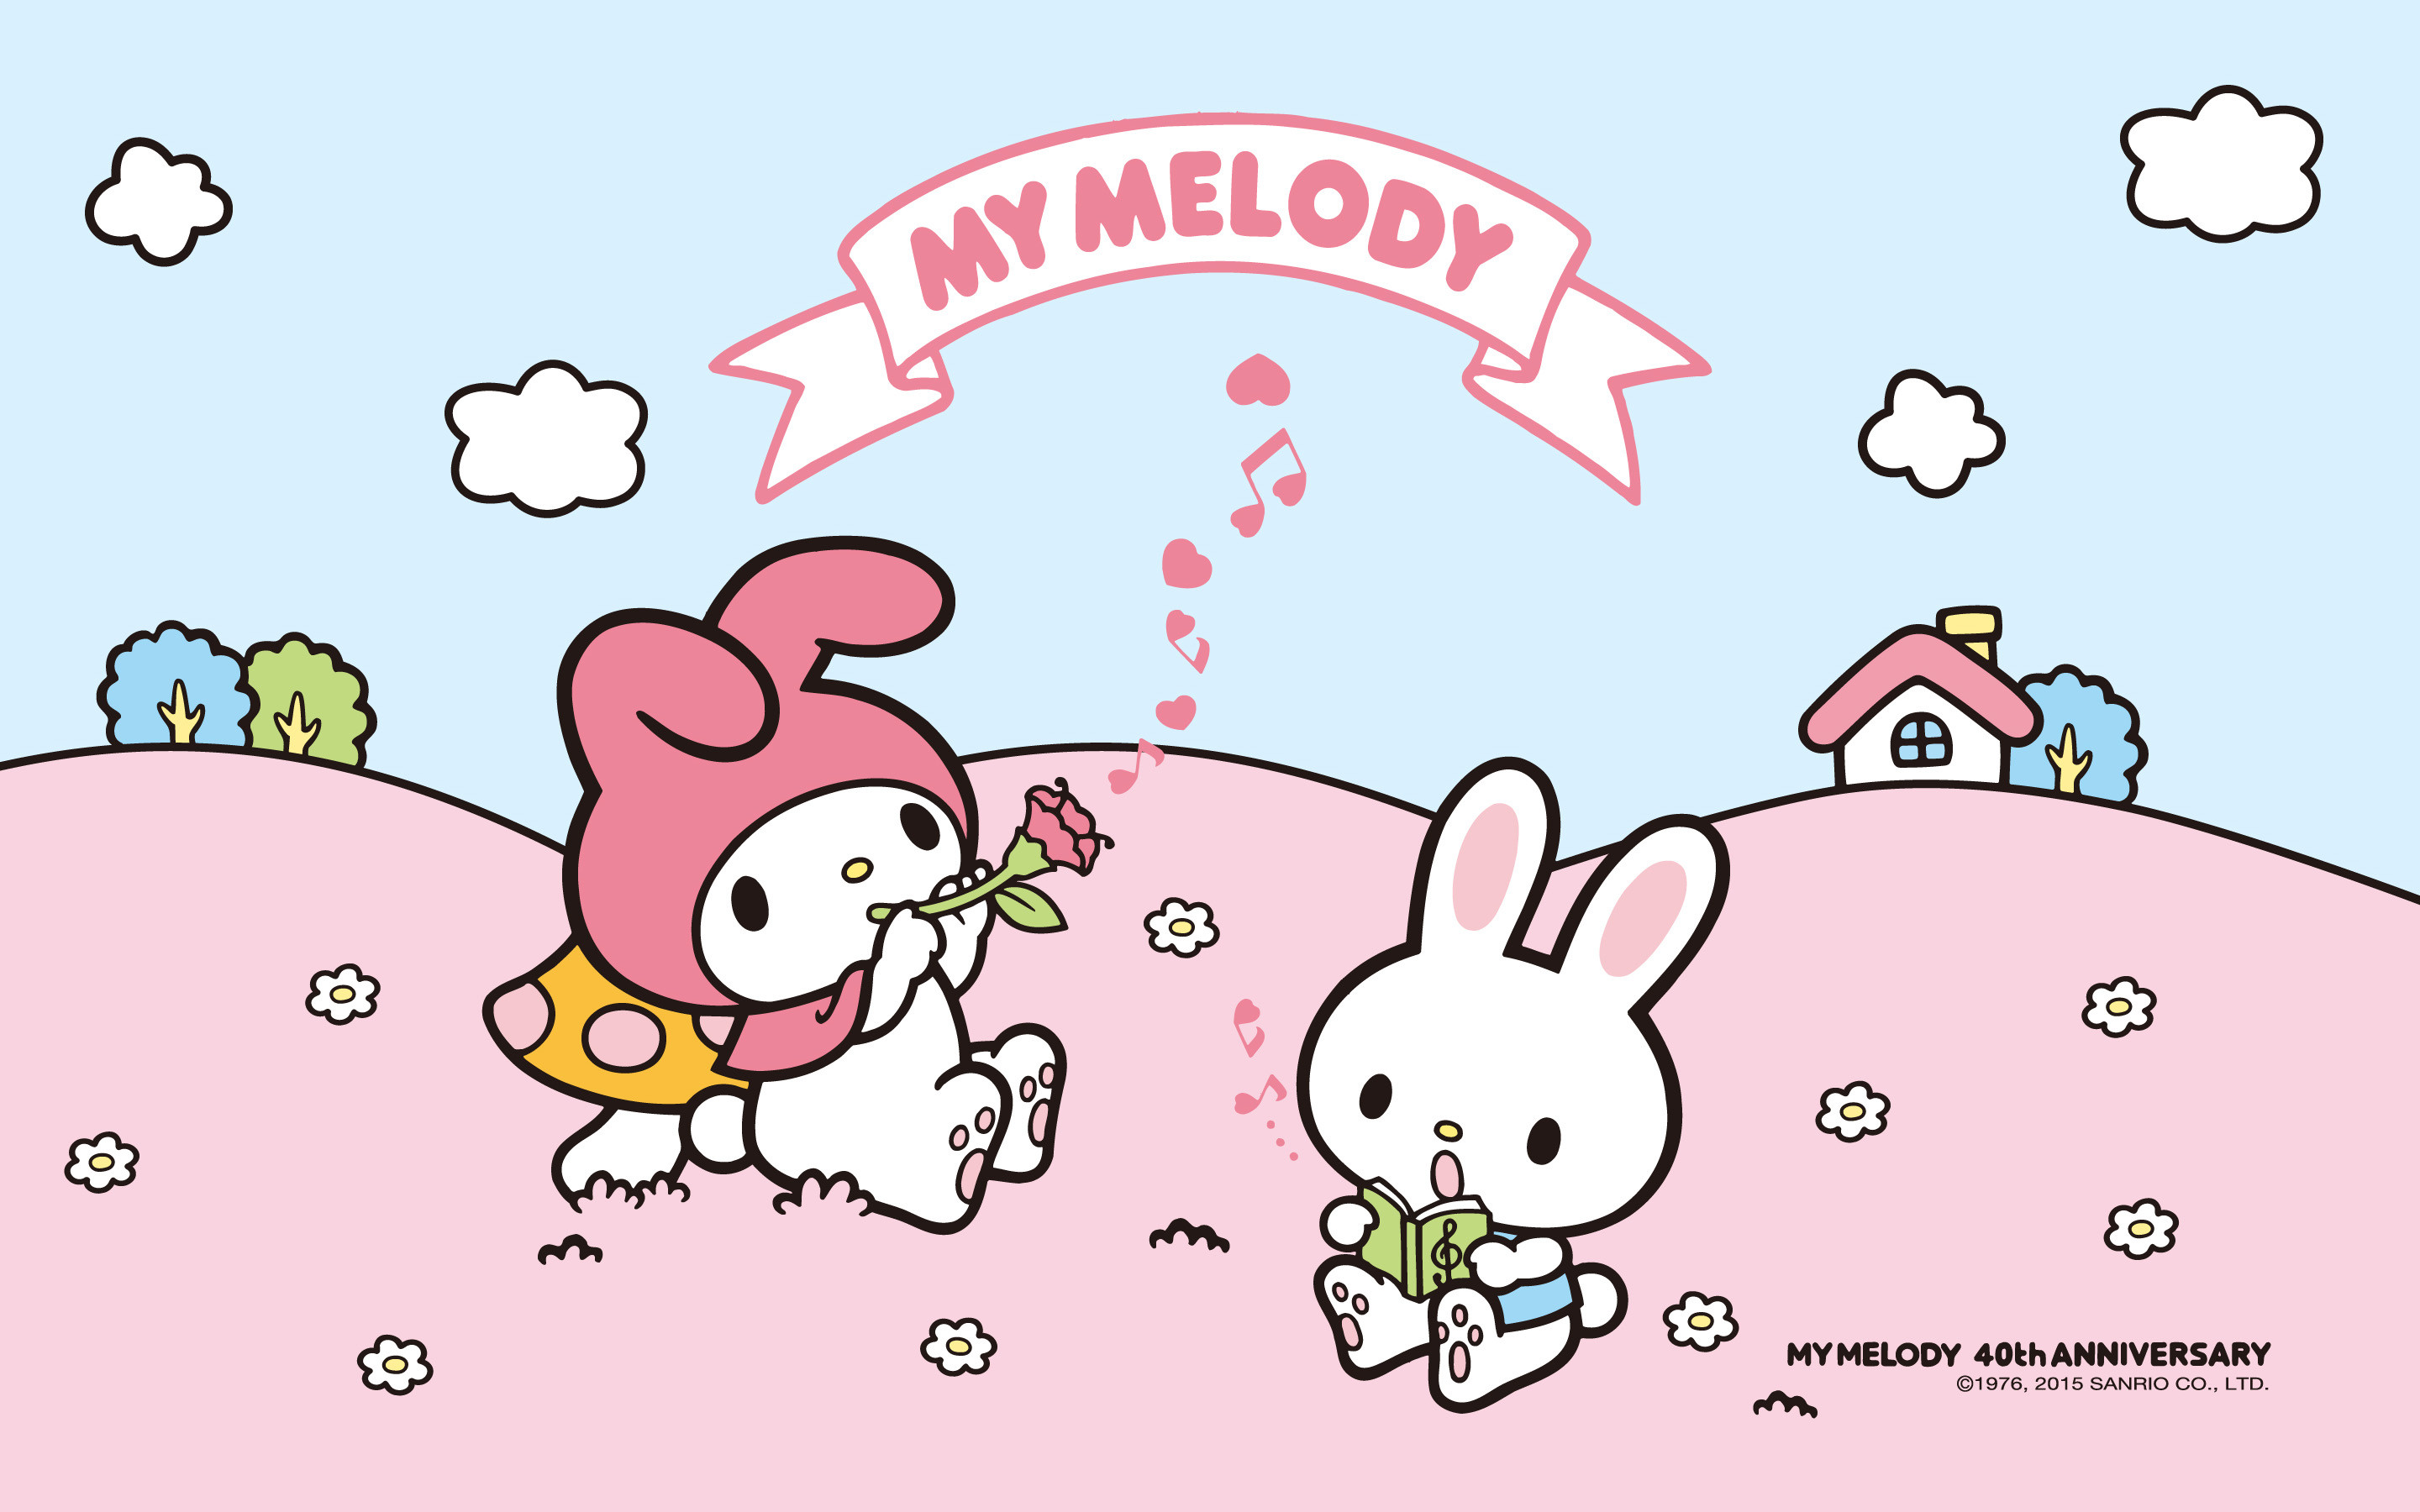 2880x1800 My Melody Pink & Blue Music Background - A super cute desktop background  from Sanrio - My Melody Pink & Blue Music Background! Click the image to  view the ...